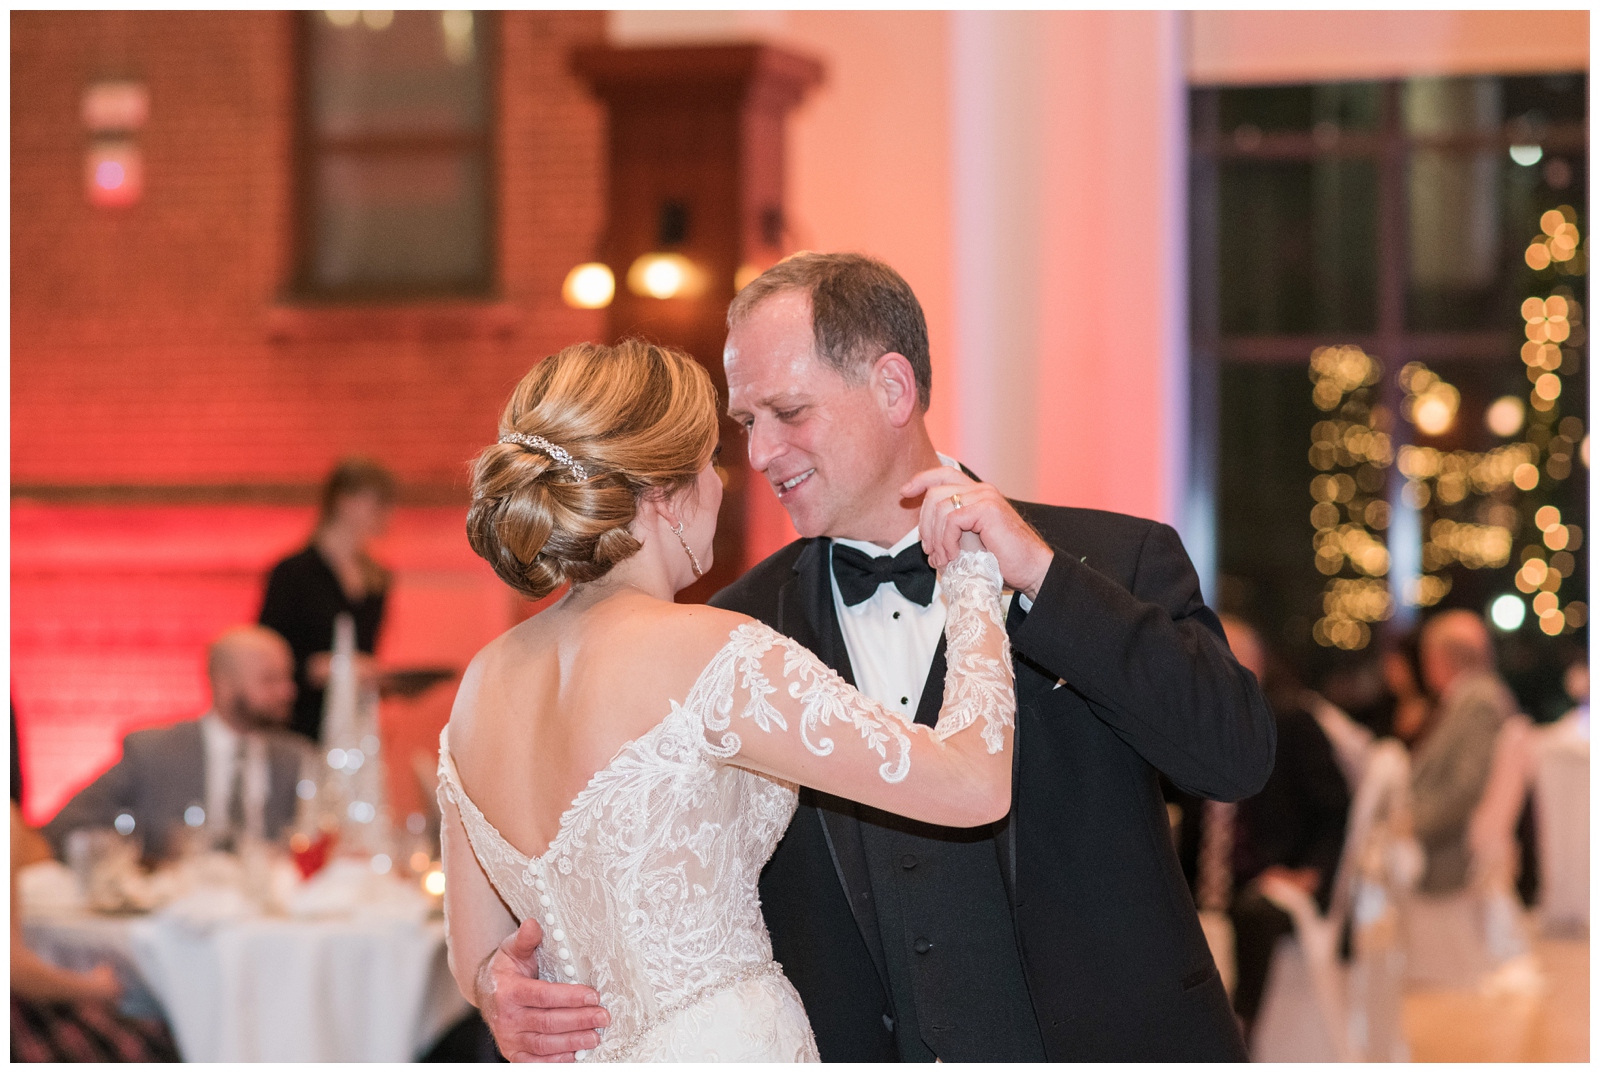 father-daughter dance at St. Charles Preparatory School wedding reception